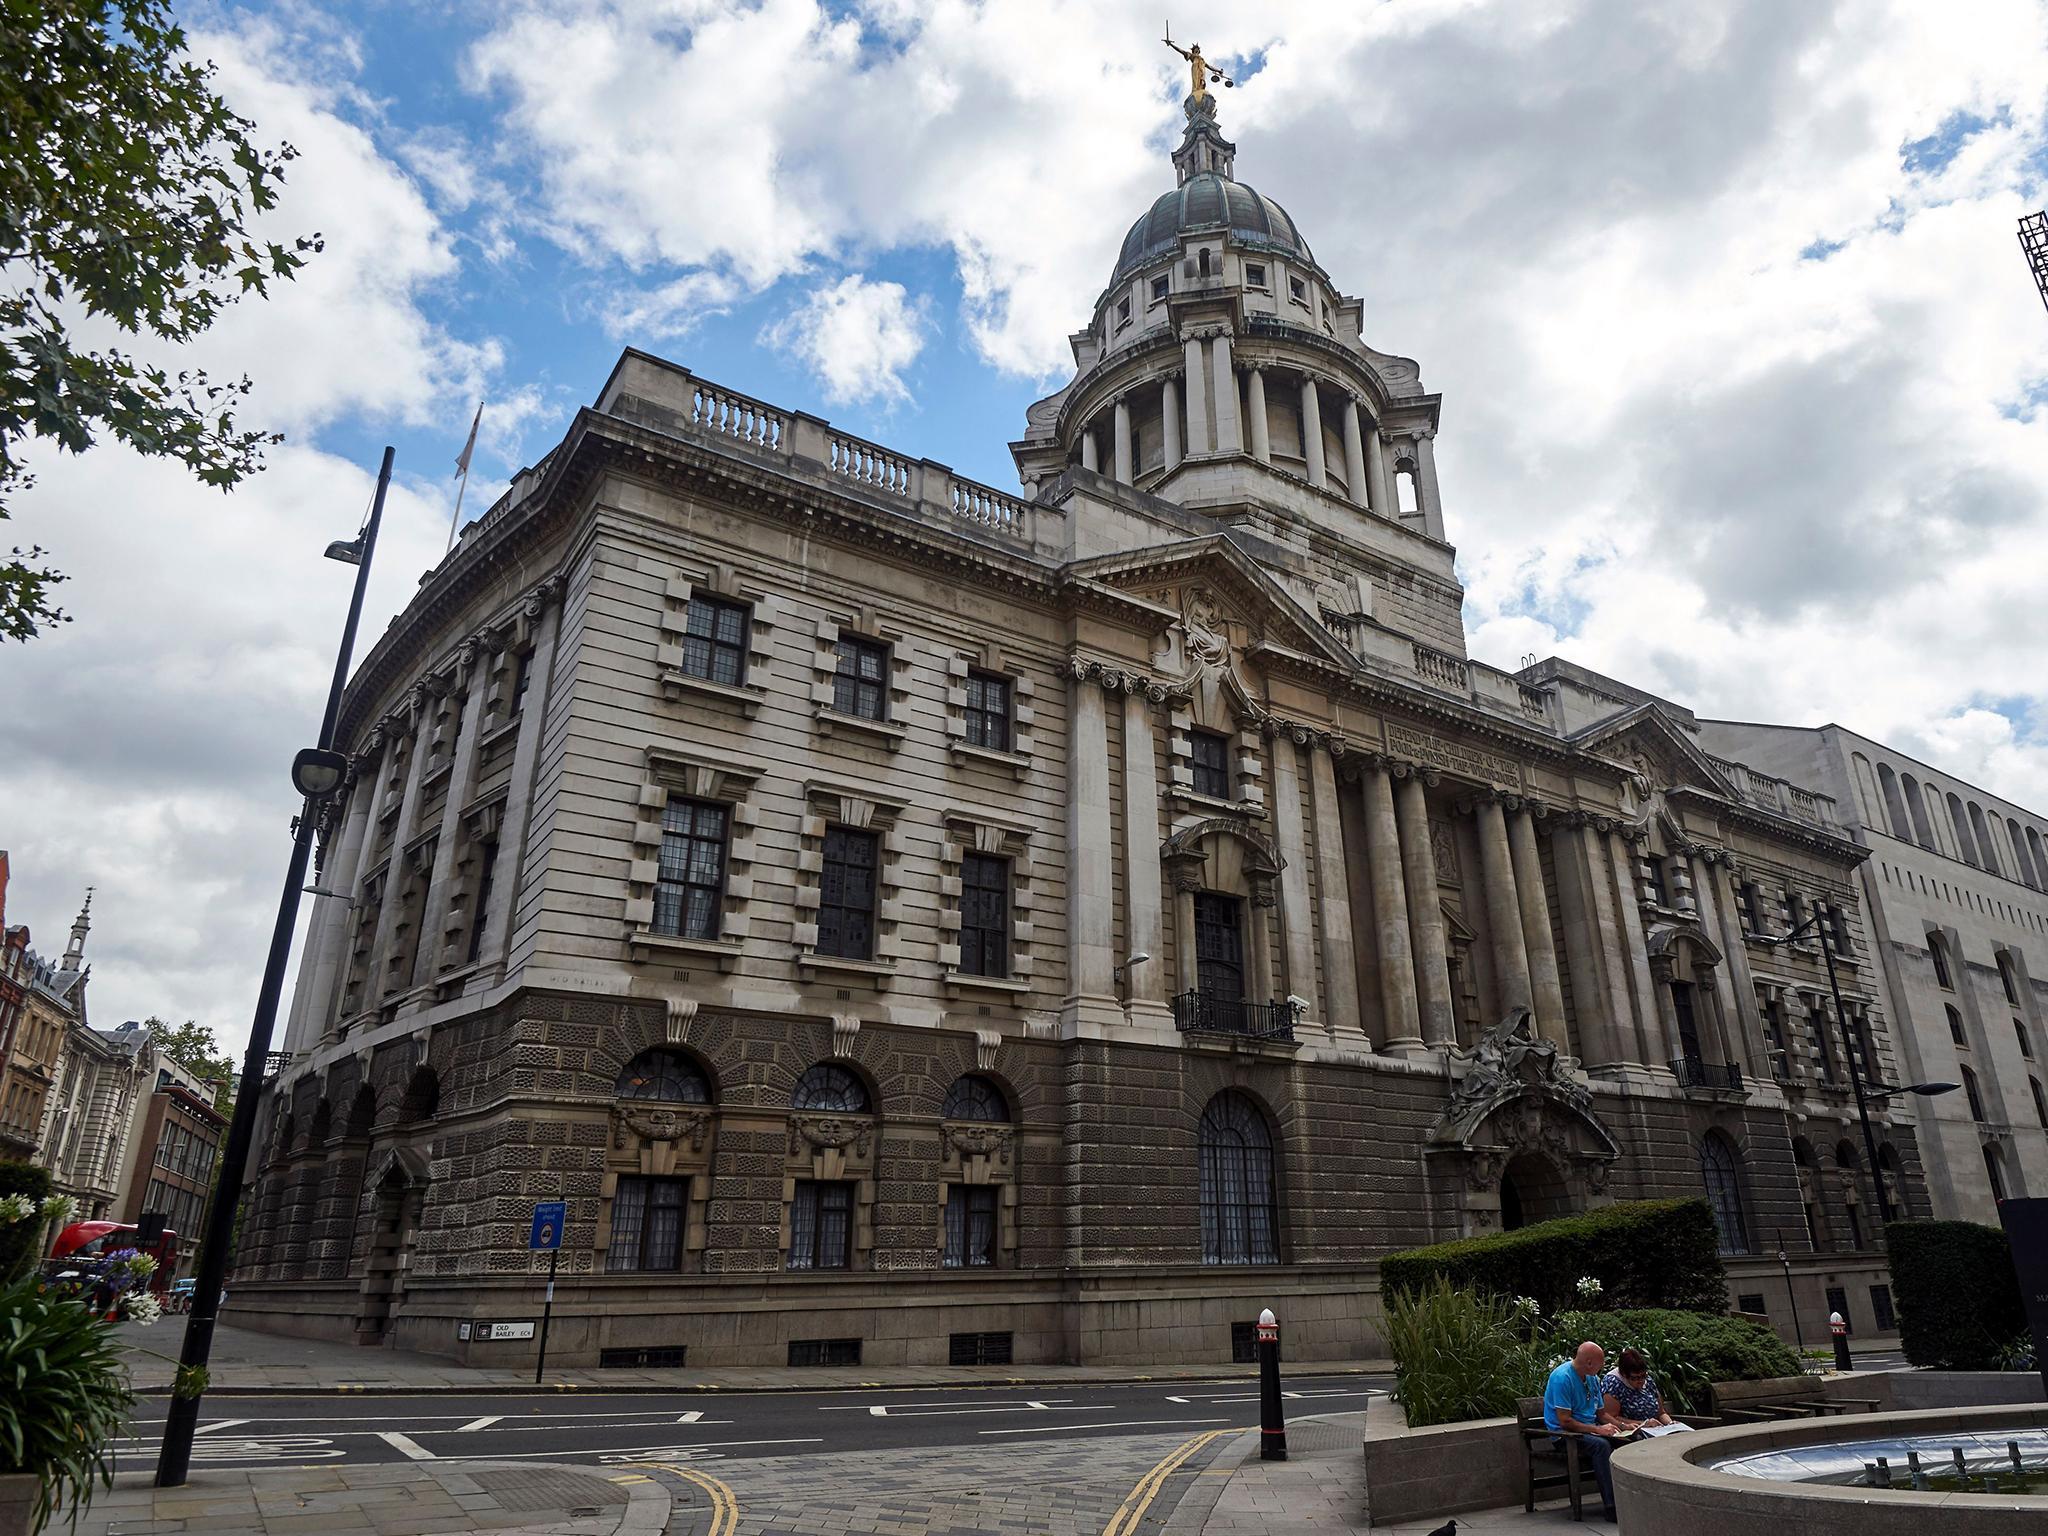 At the Old Bailey, Mr Varchmin was found not guilty of possessing indecent images of children and crystal meth